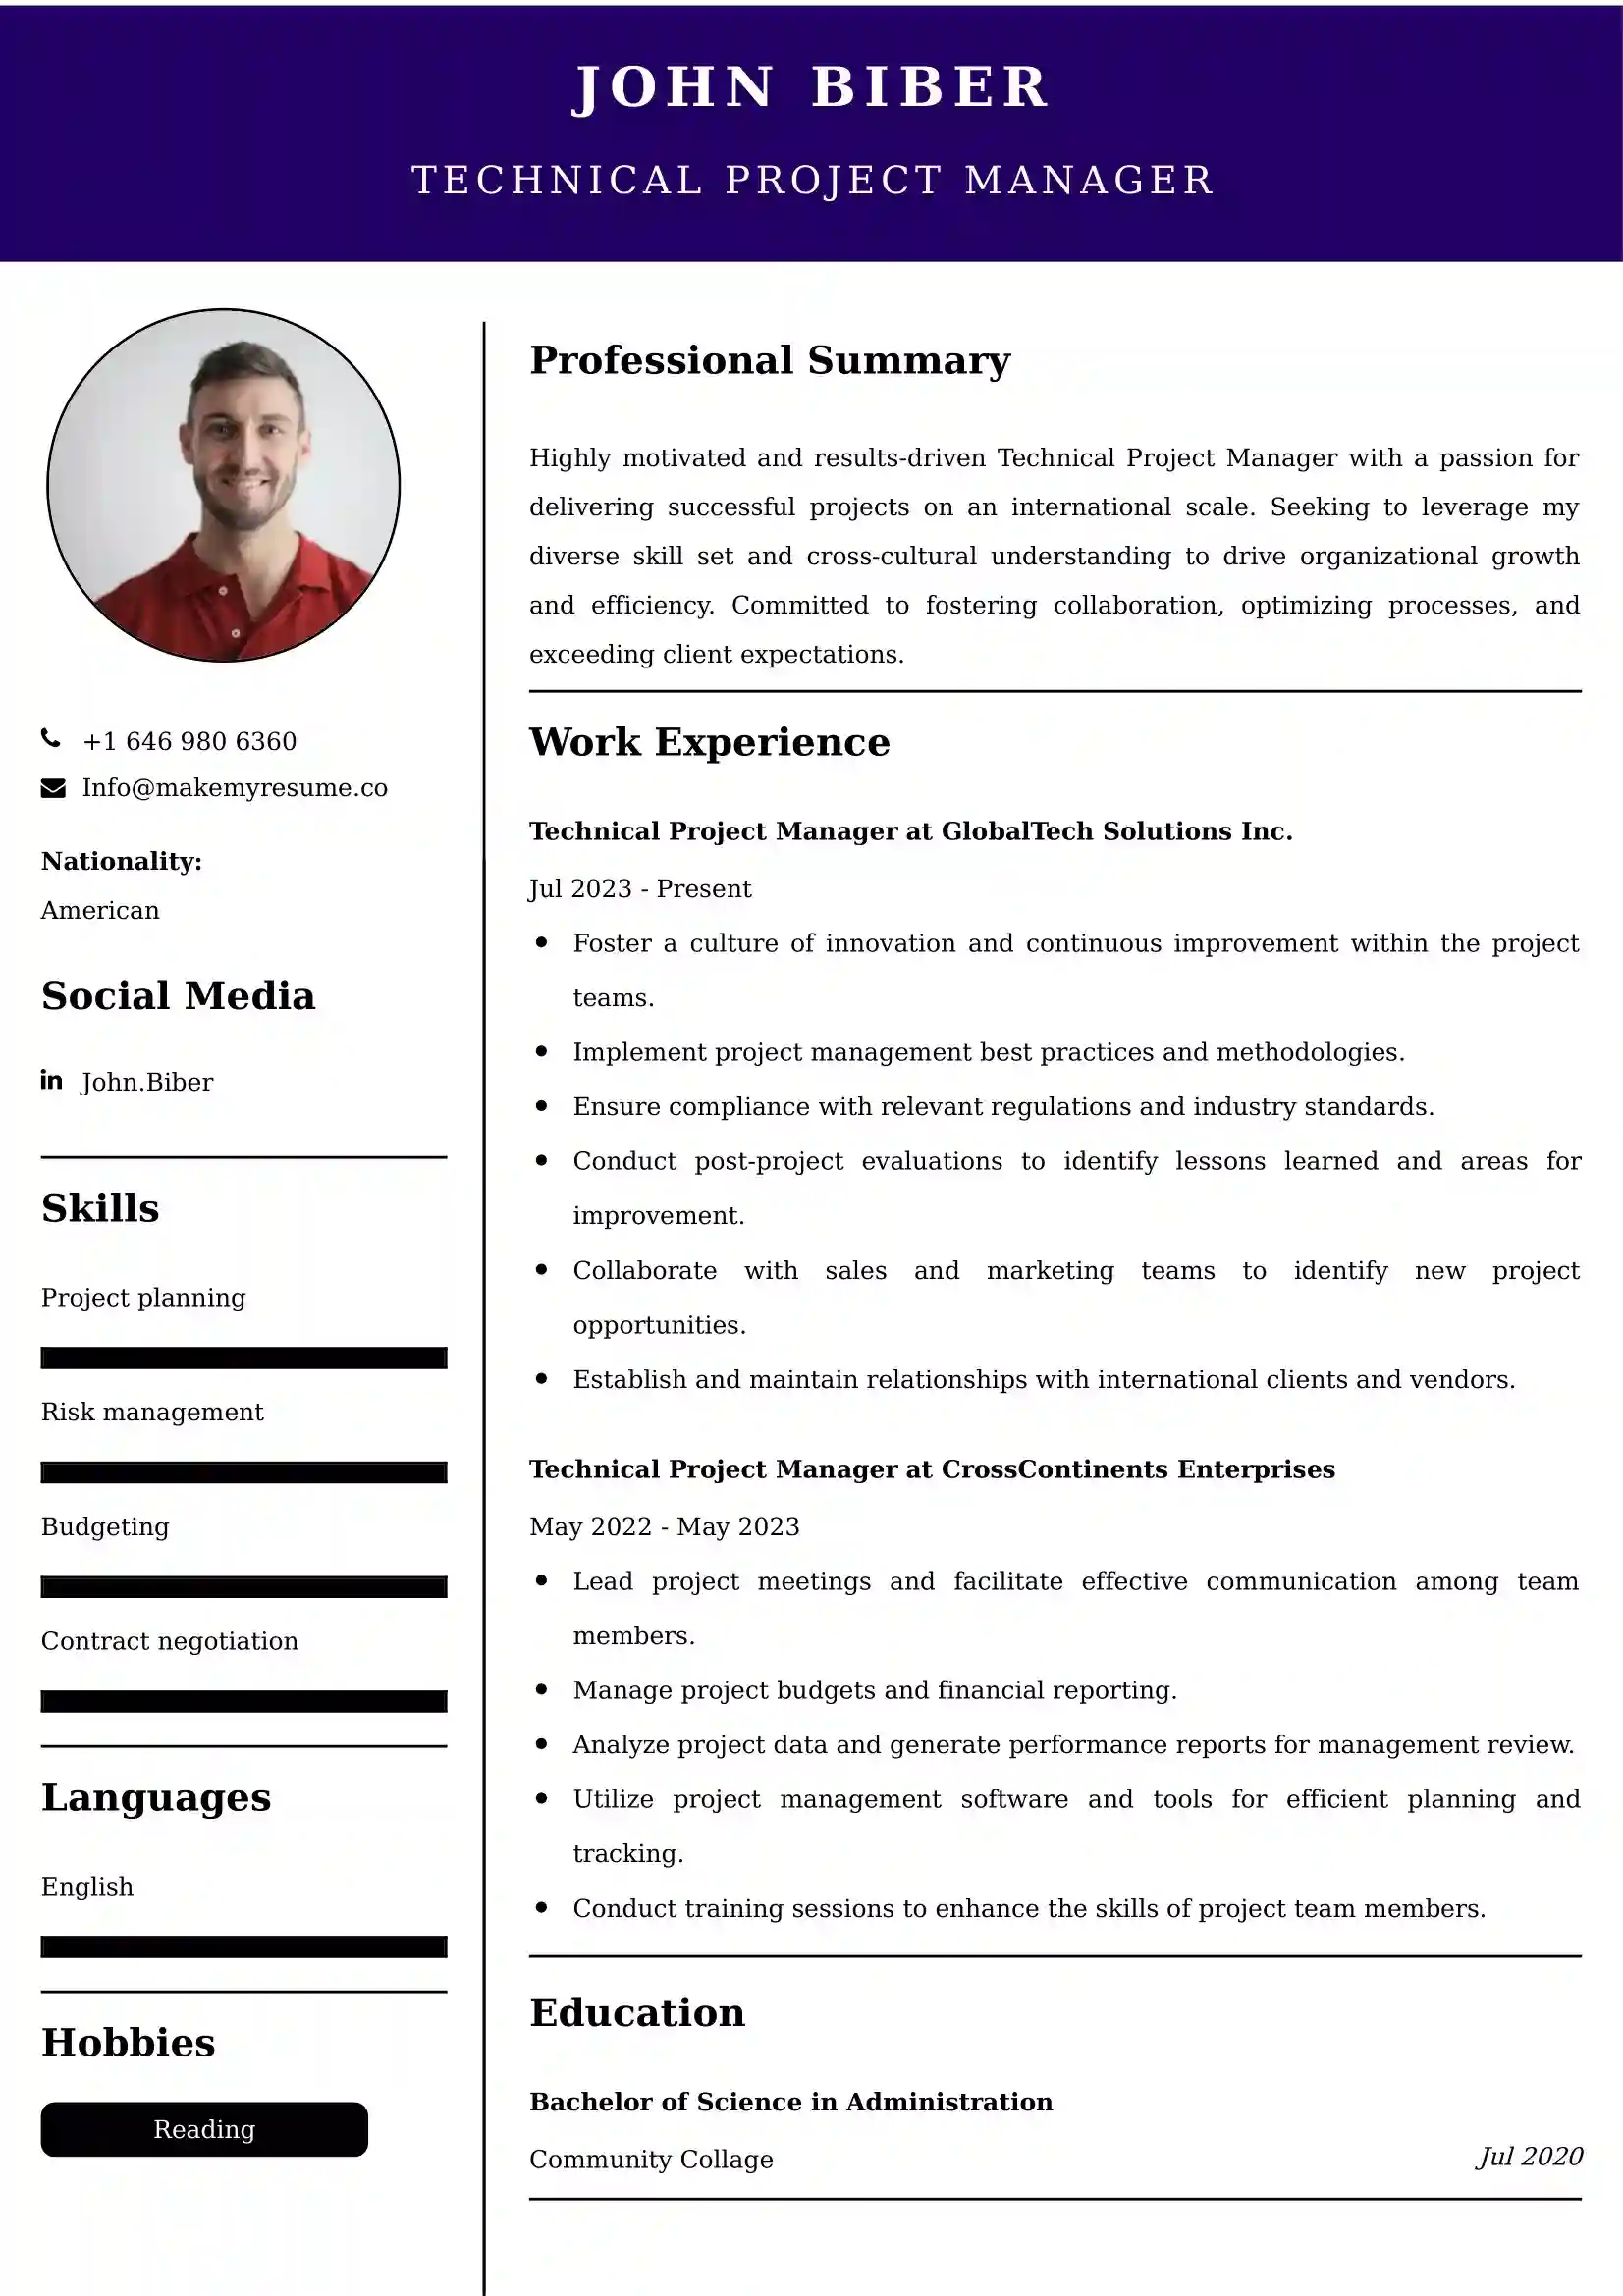 Technical Project Manager Resume Examples - Brazilian Format, Latest Template